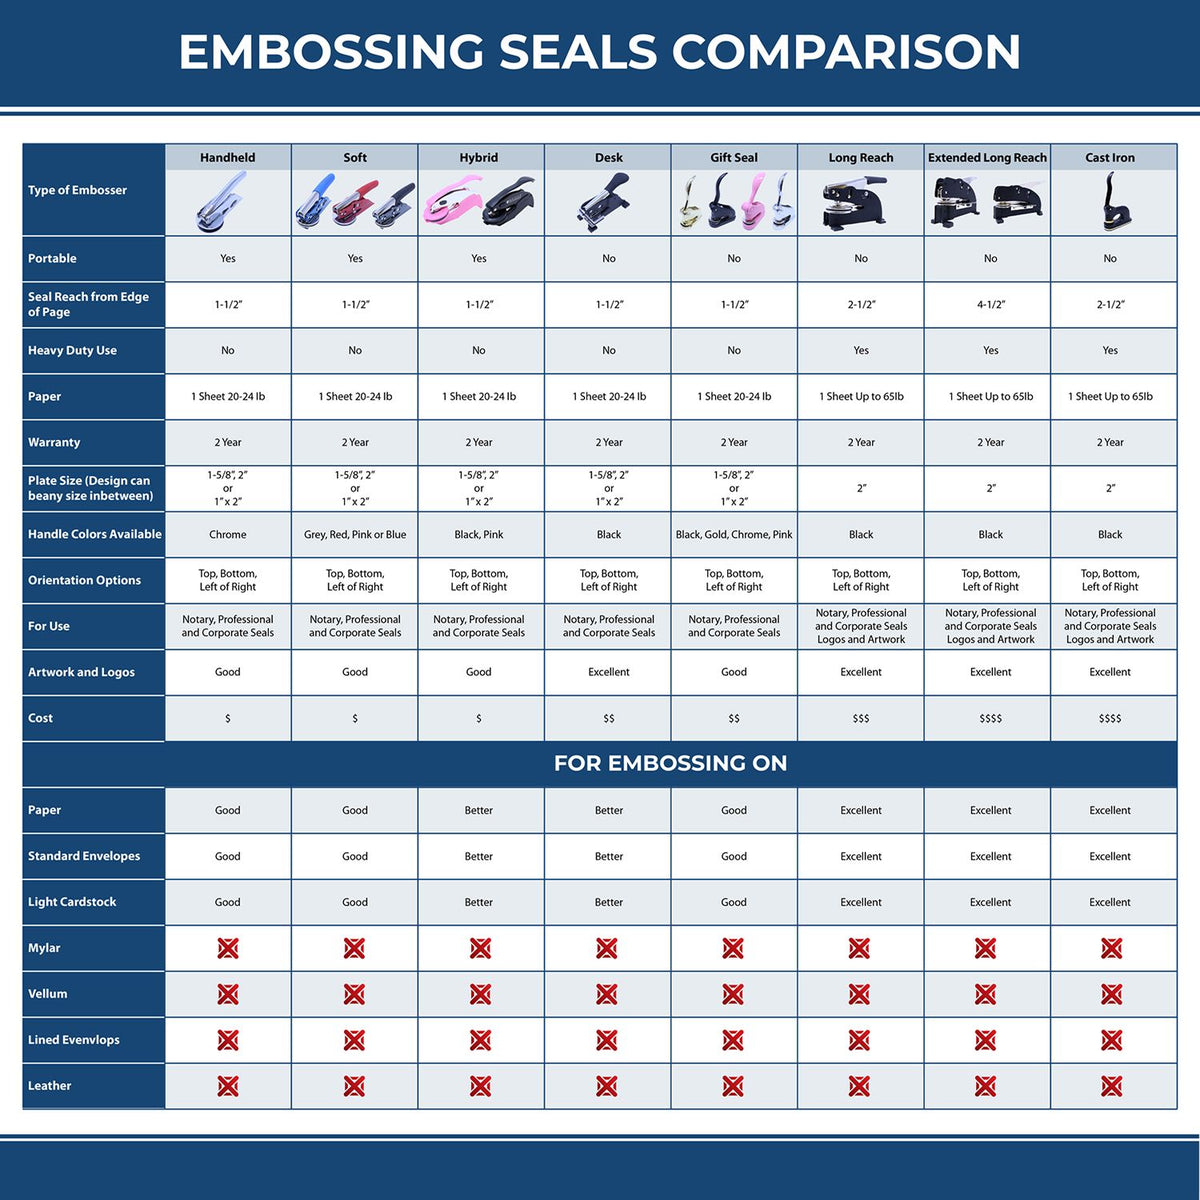 A comparison chart for the different types of mount models available for the Soft Pocket Texas Landscape Architect Embosser.